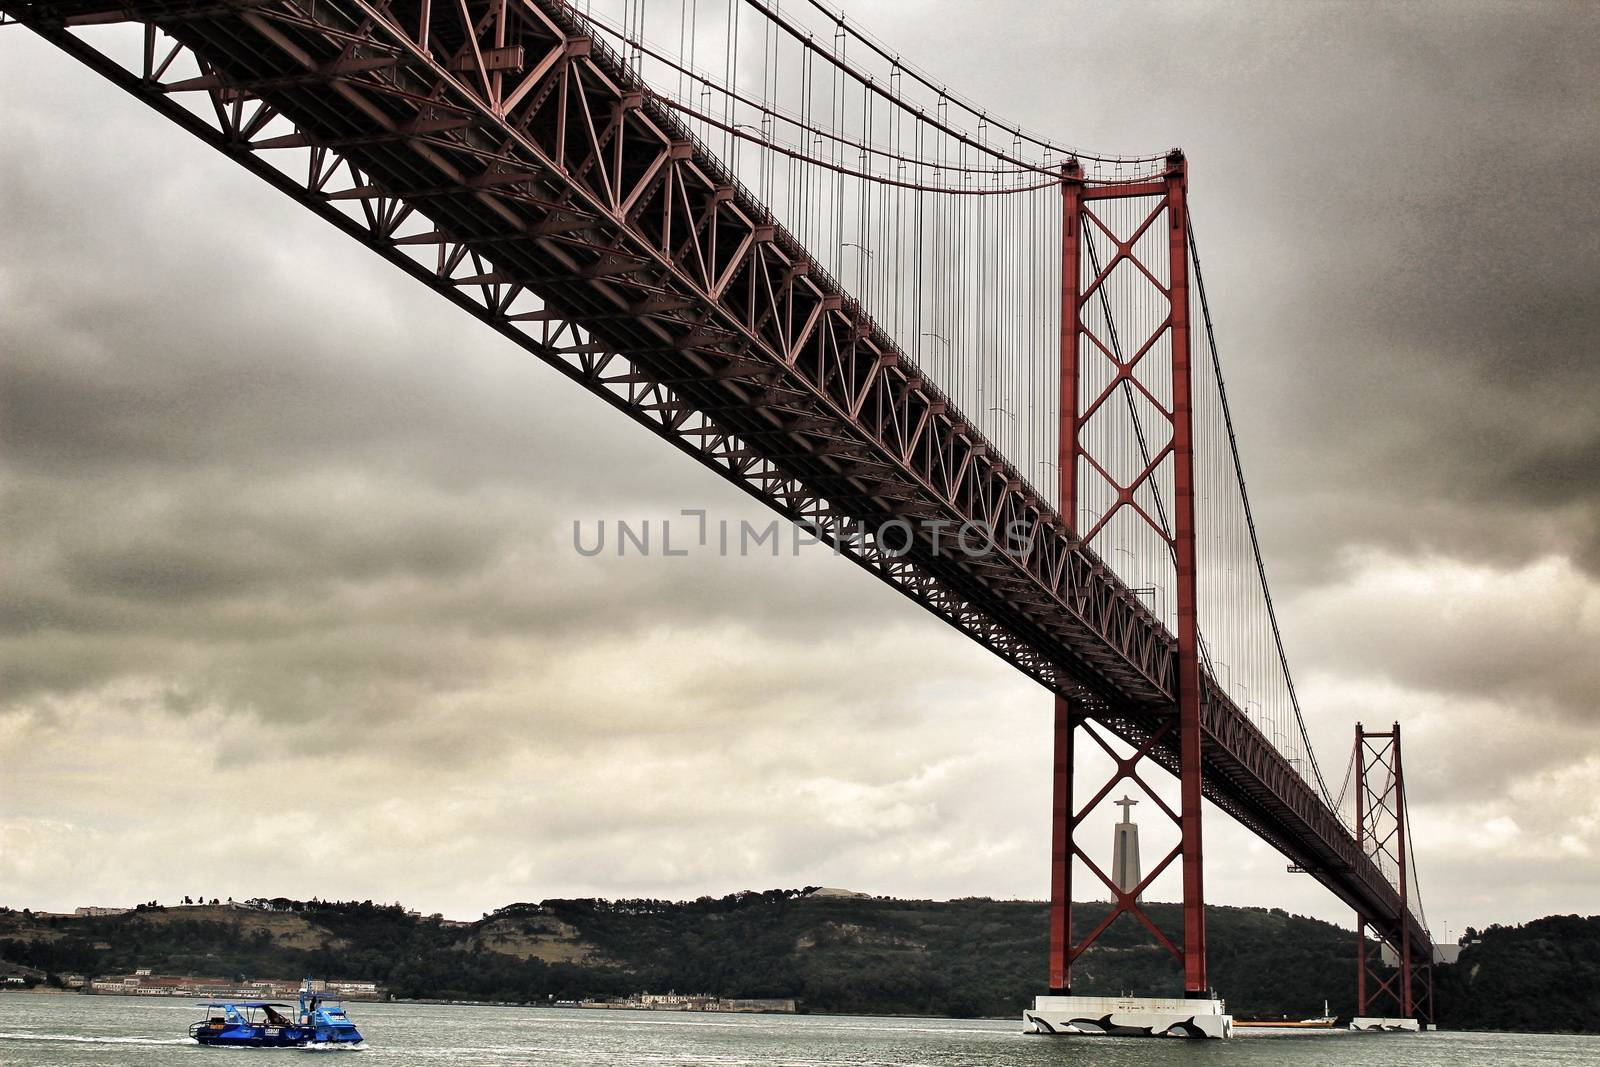 Lisbon, Portugal- June 1, 2018:Banks of the river Tagus in Lisbon in Spring on a cloudy day. Beautiful 25th April bridge structure.